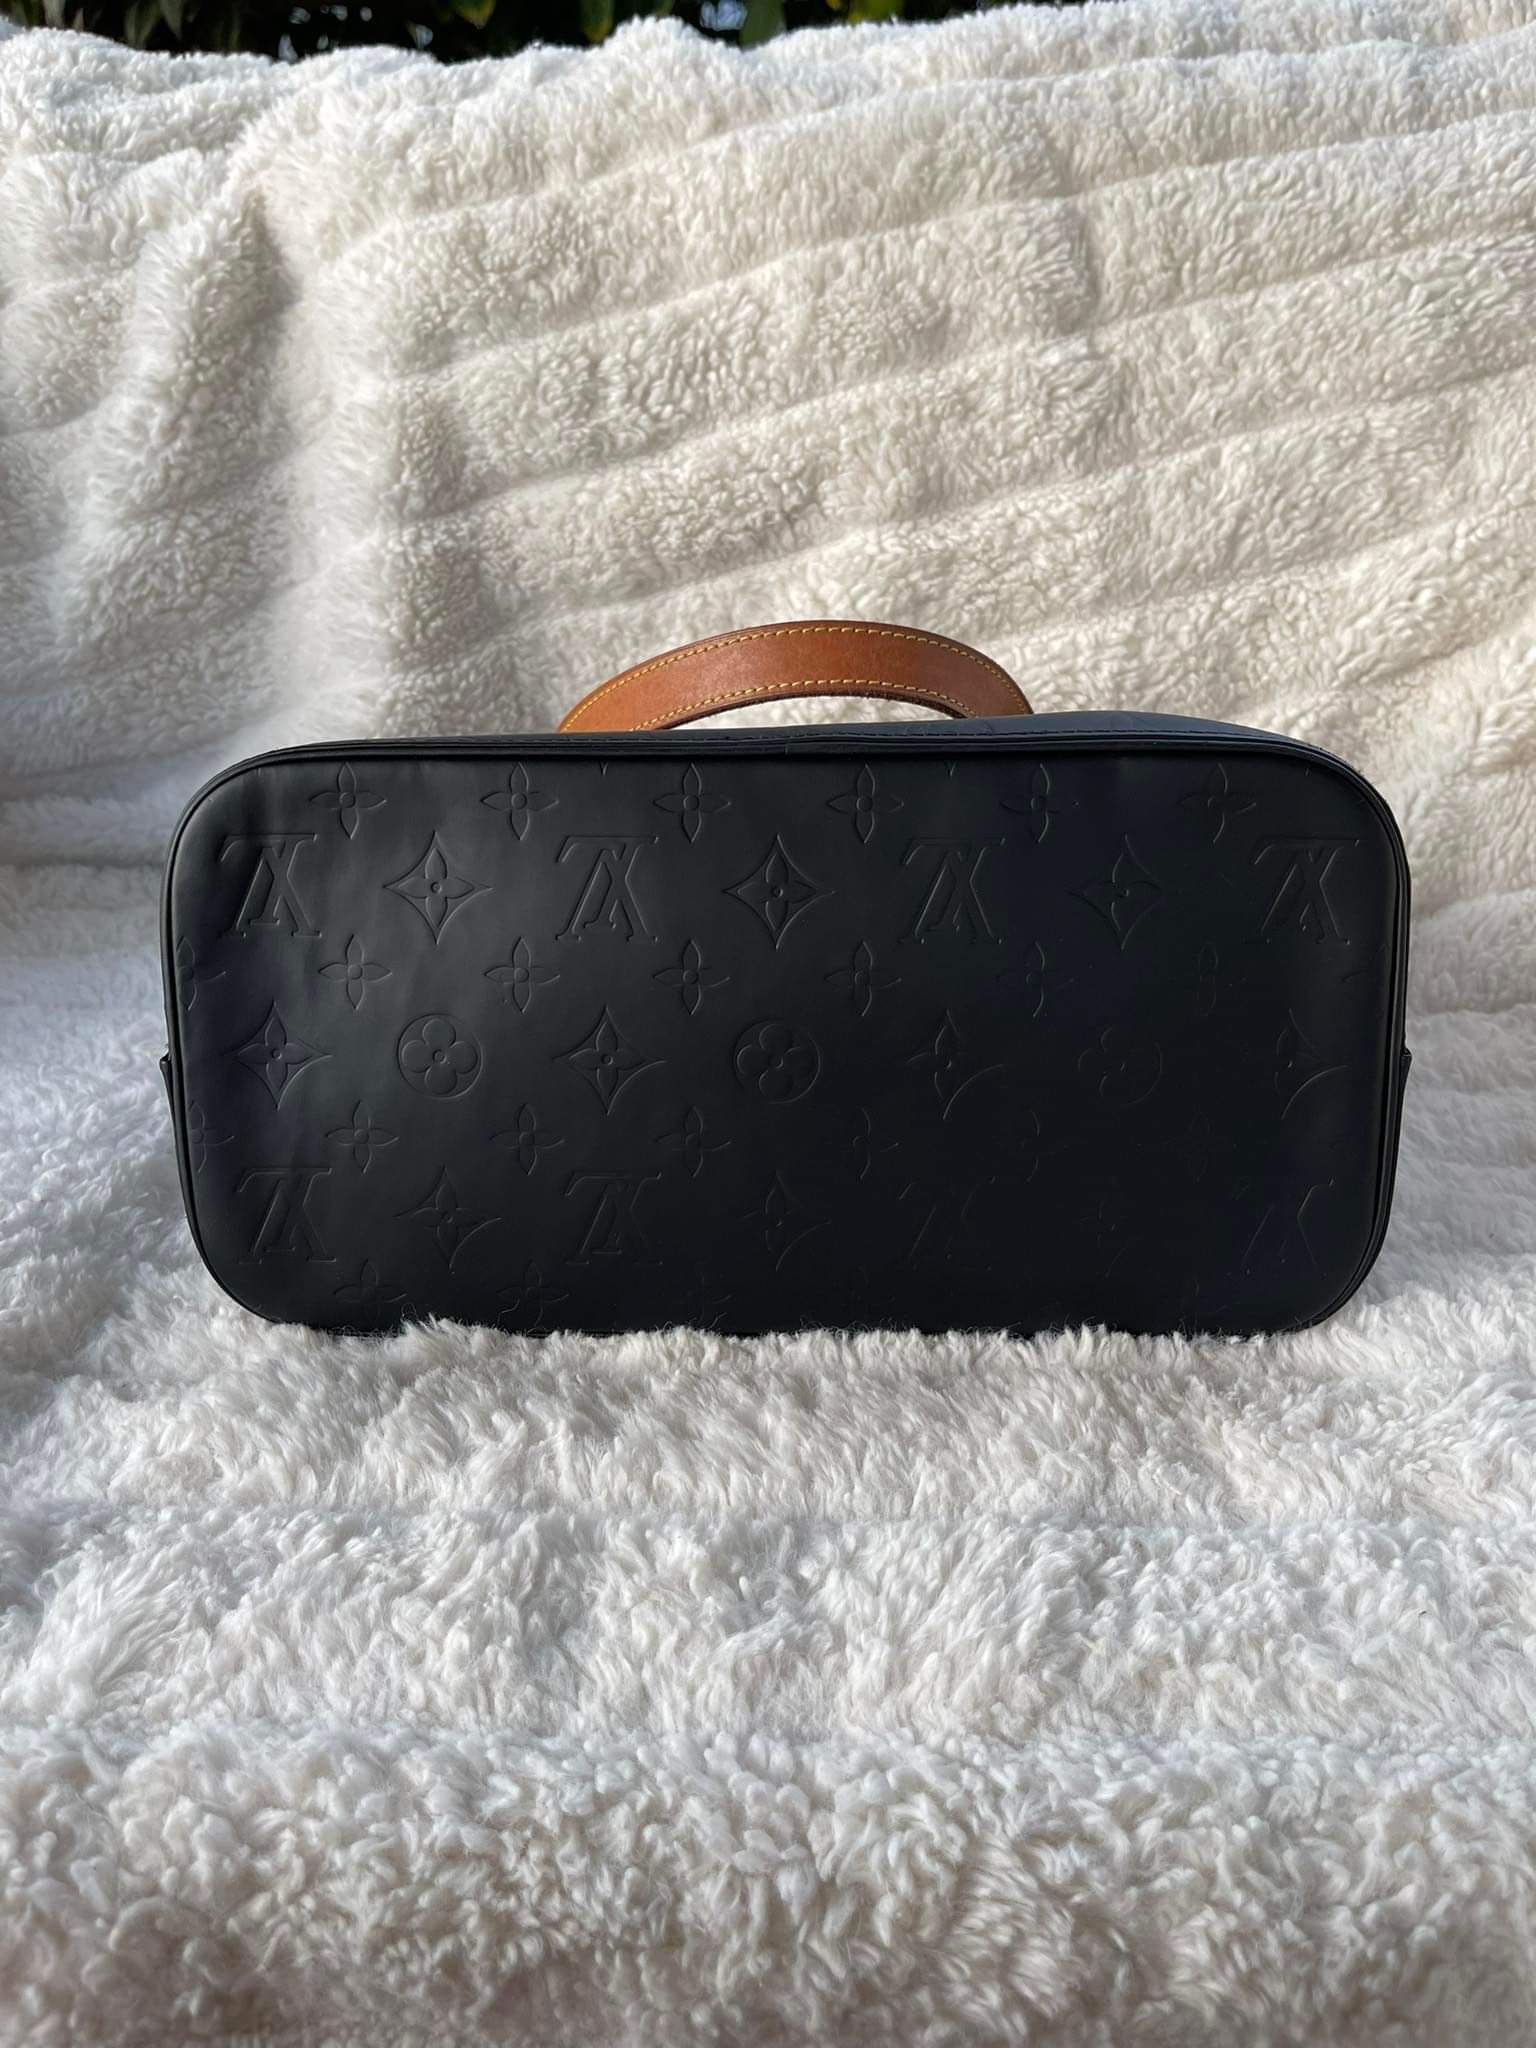 Authentic Matte Black LV Vernis Bag for Sale in West Islip, NY